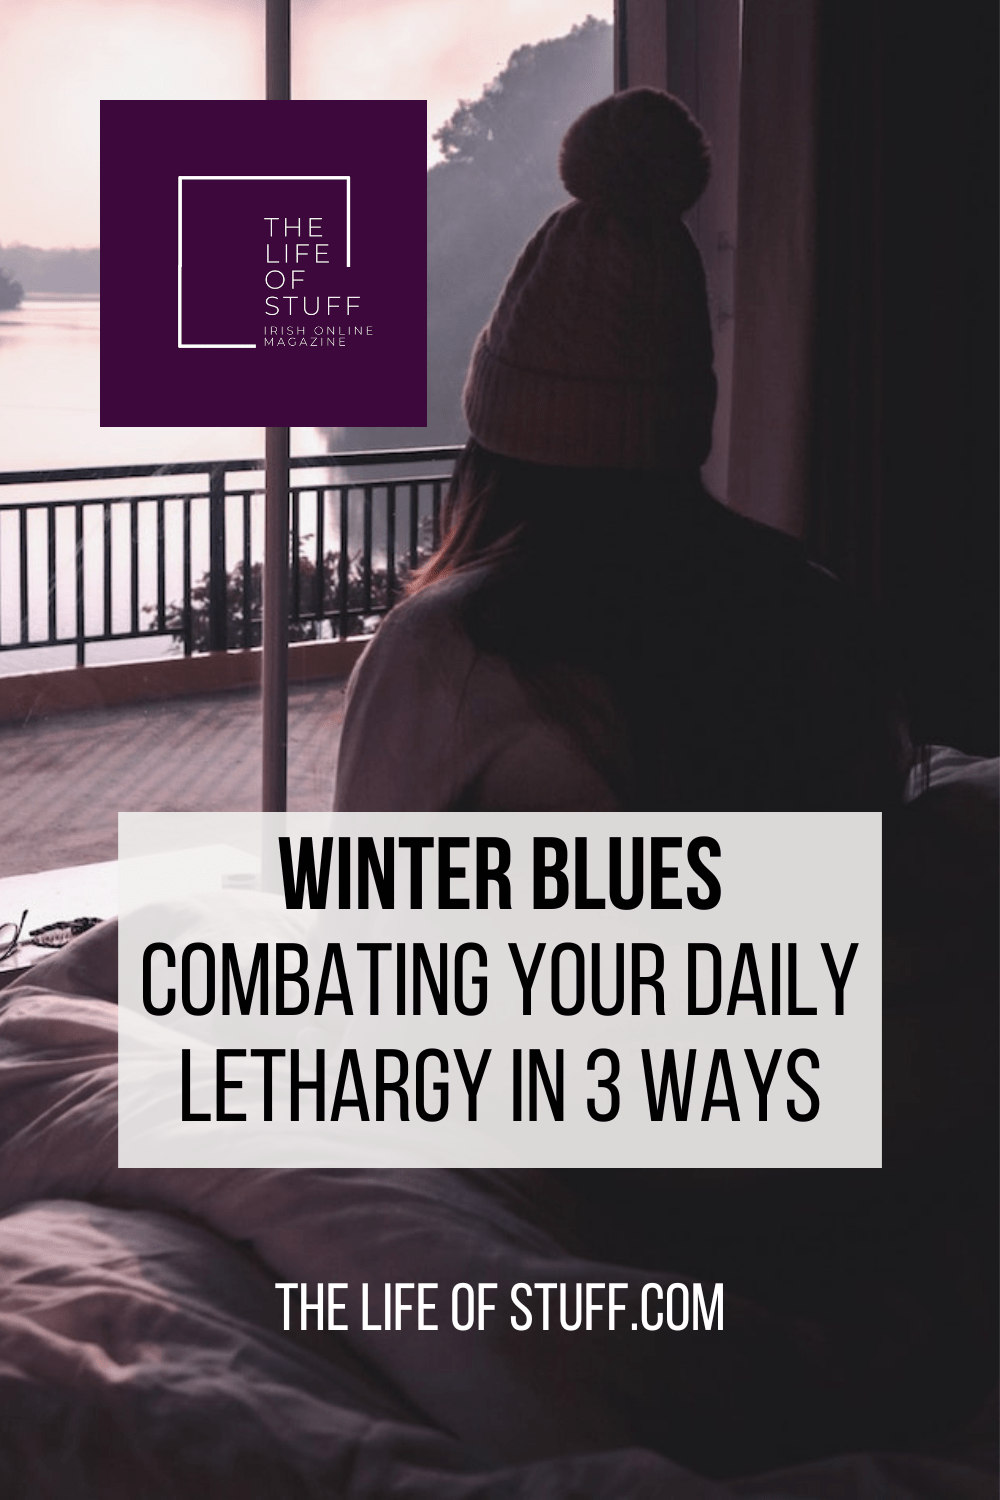 Winter Blues - Combating Your Daily Lethargy in 3 Ways - The Life of Stuff